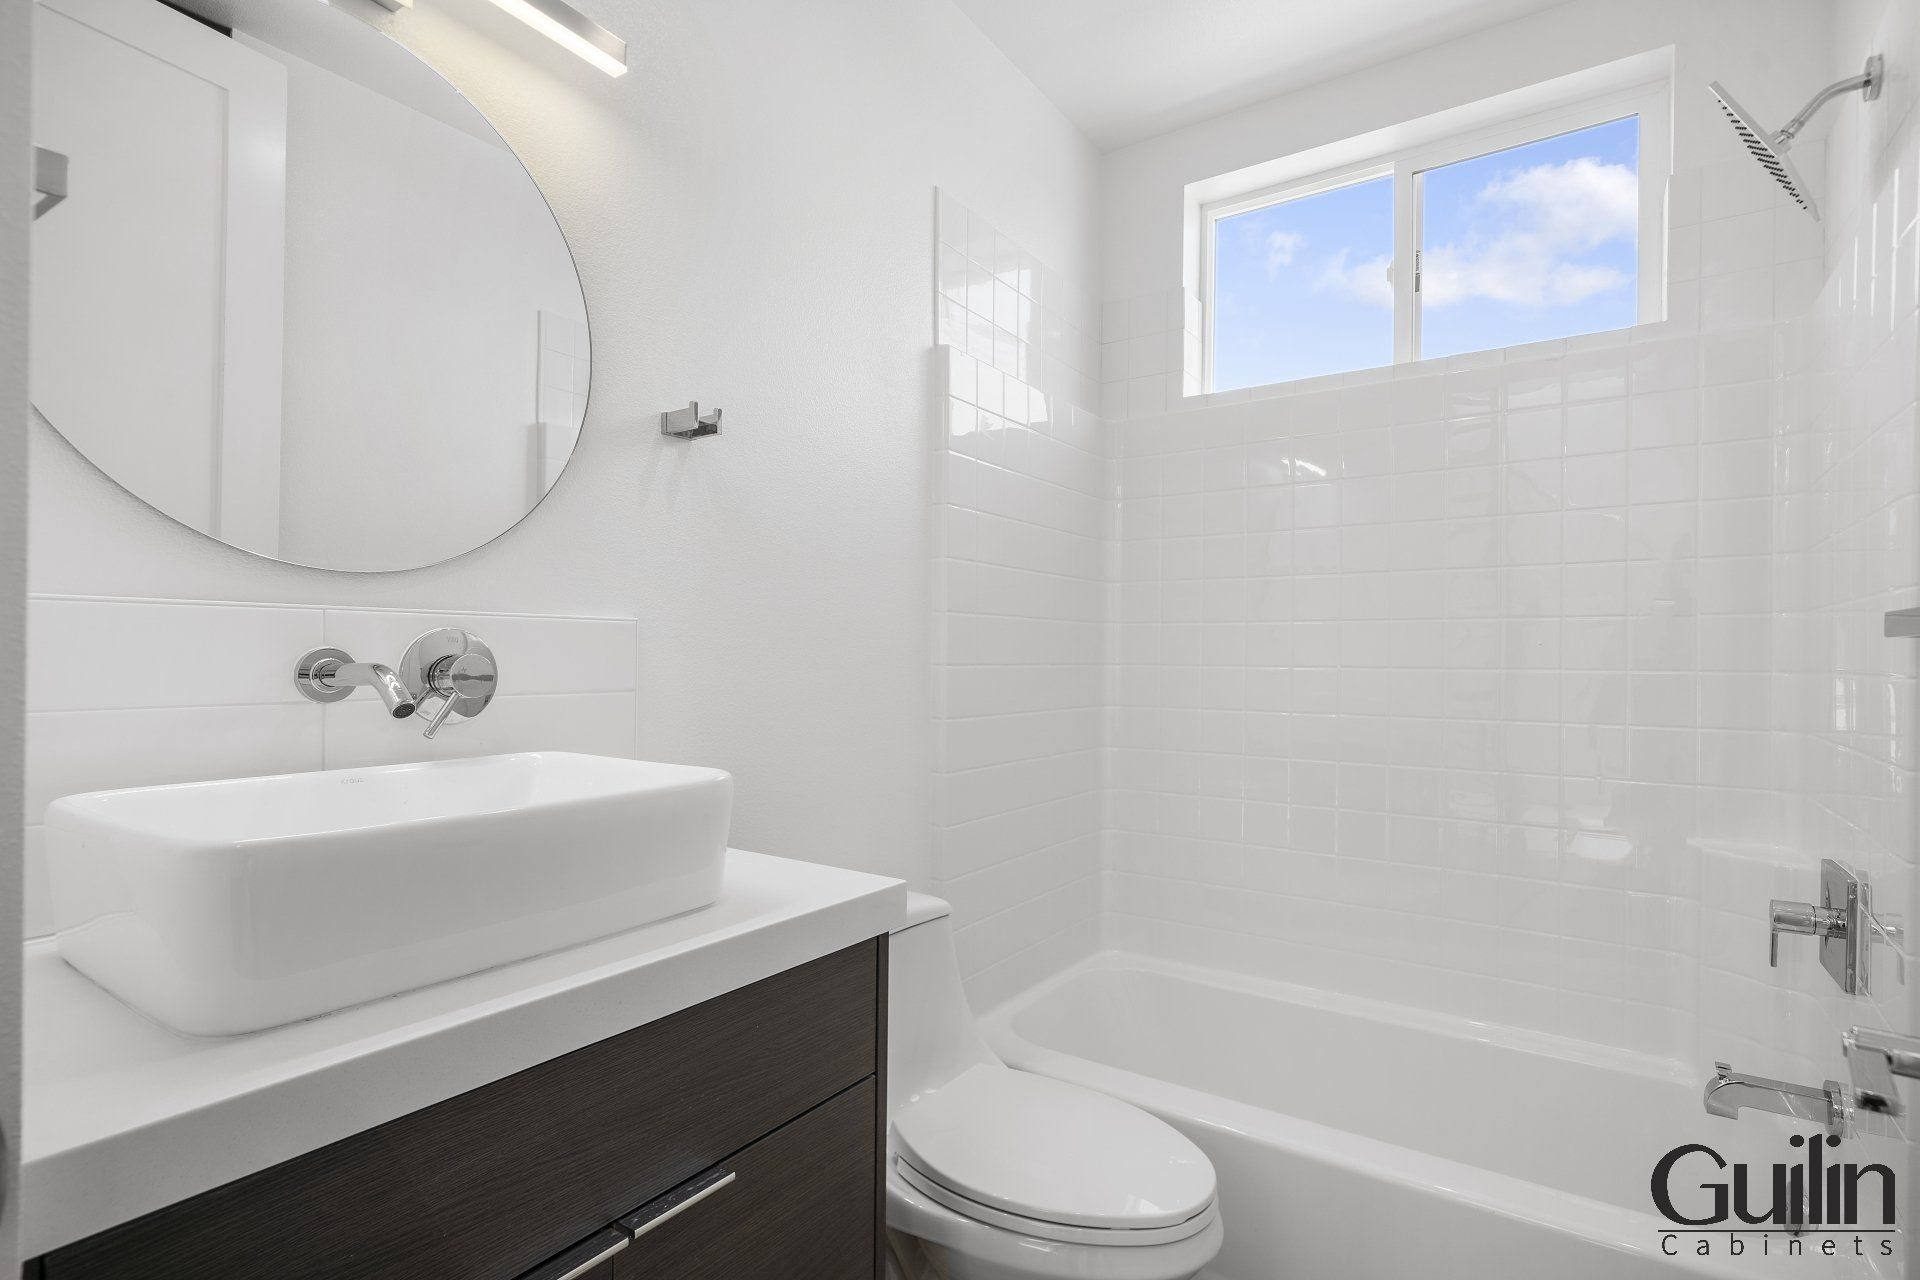 Privacy is the very important thing: with a powder room, you can keep your guests privacy and feel more comfortable